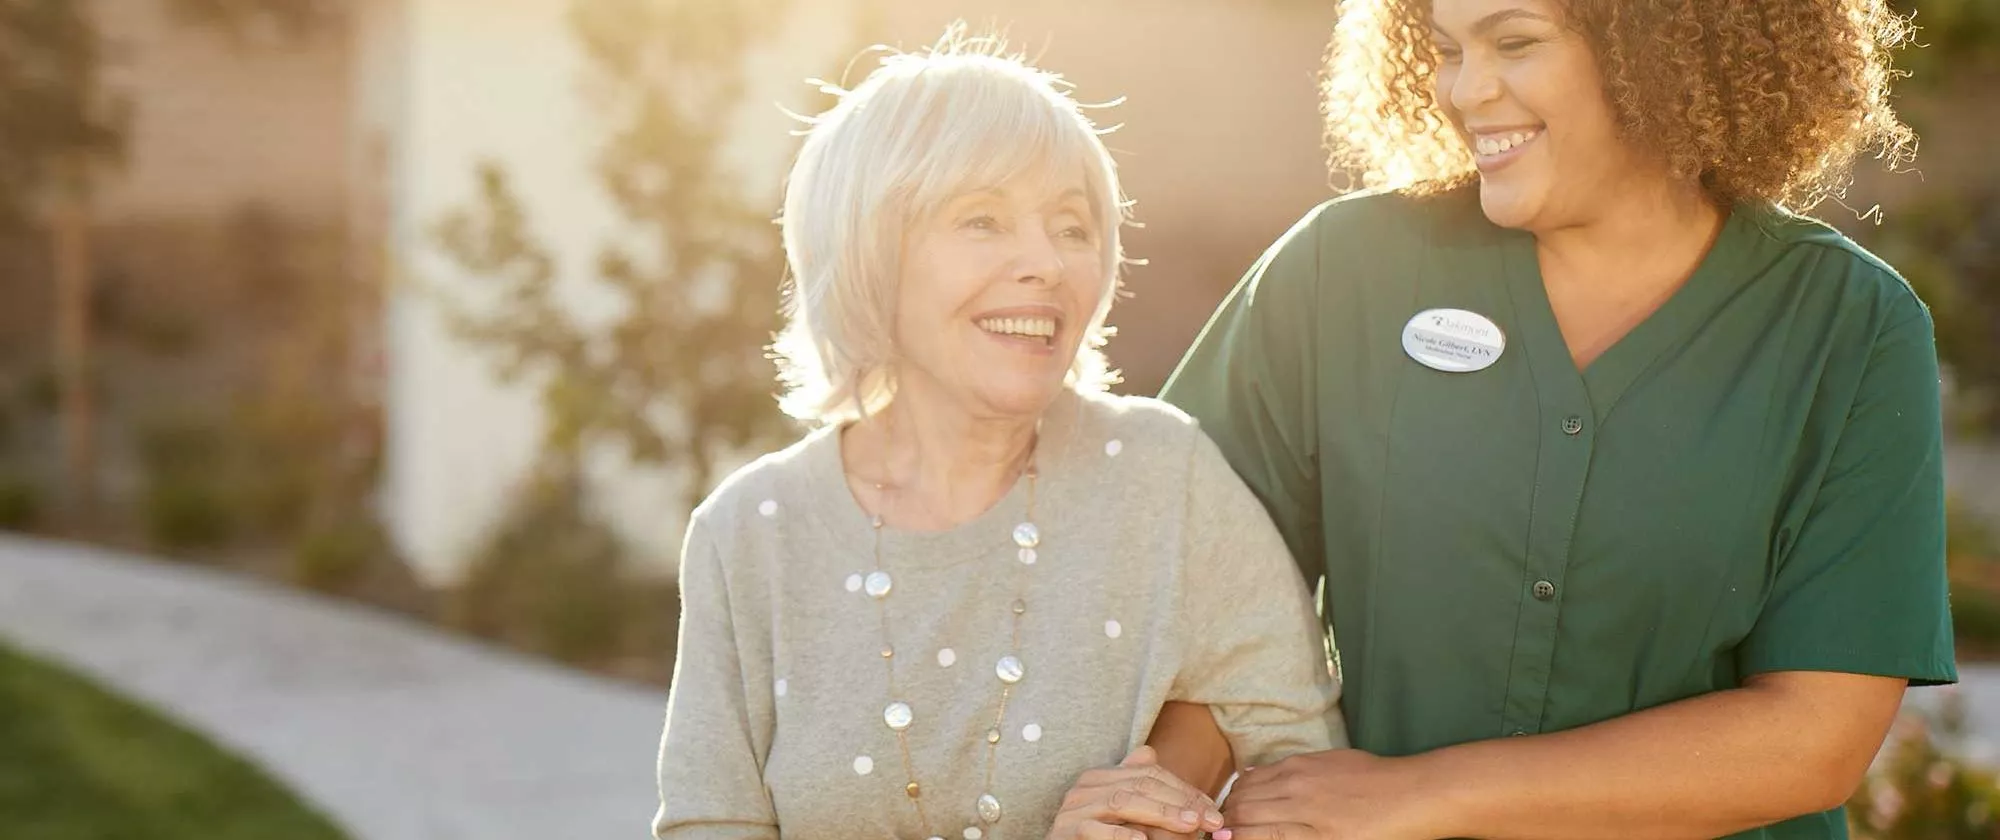 Caregiver and senior lady walking along path, smiling at each other